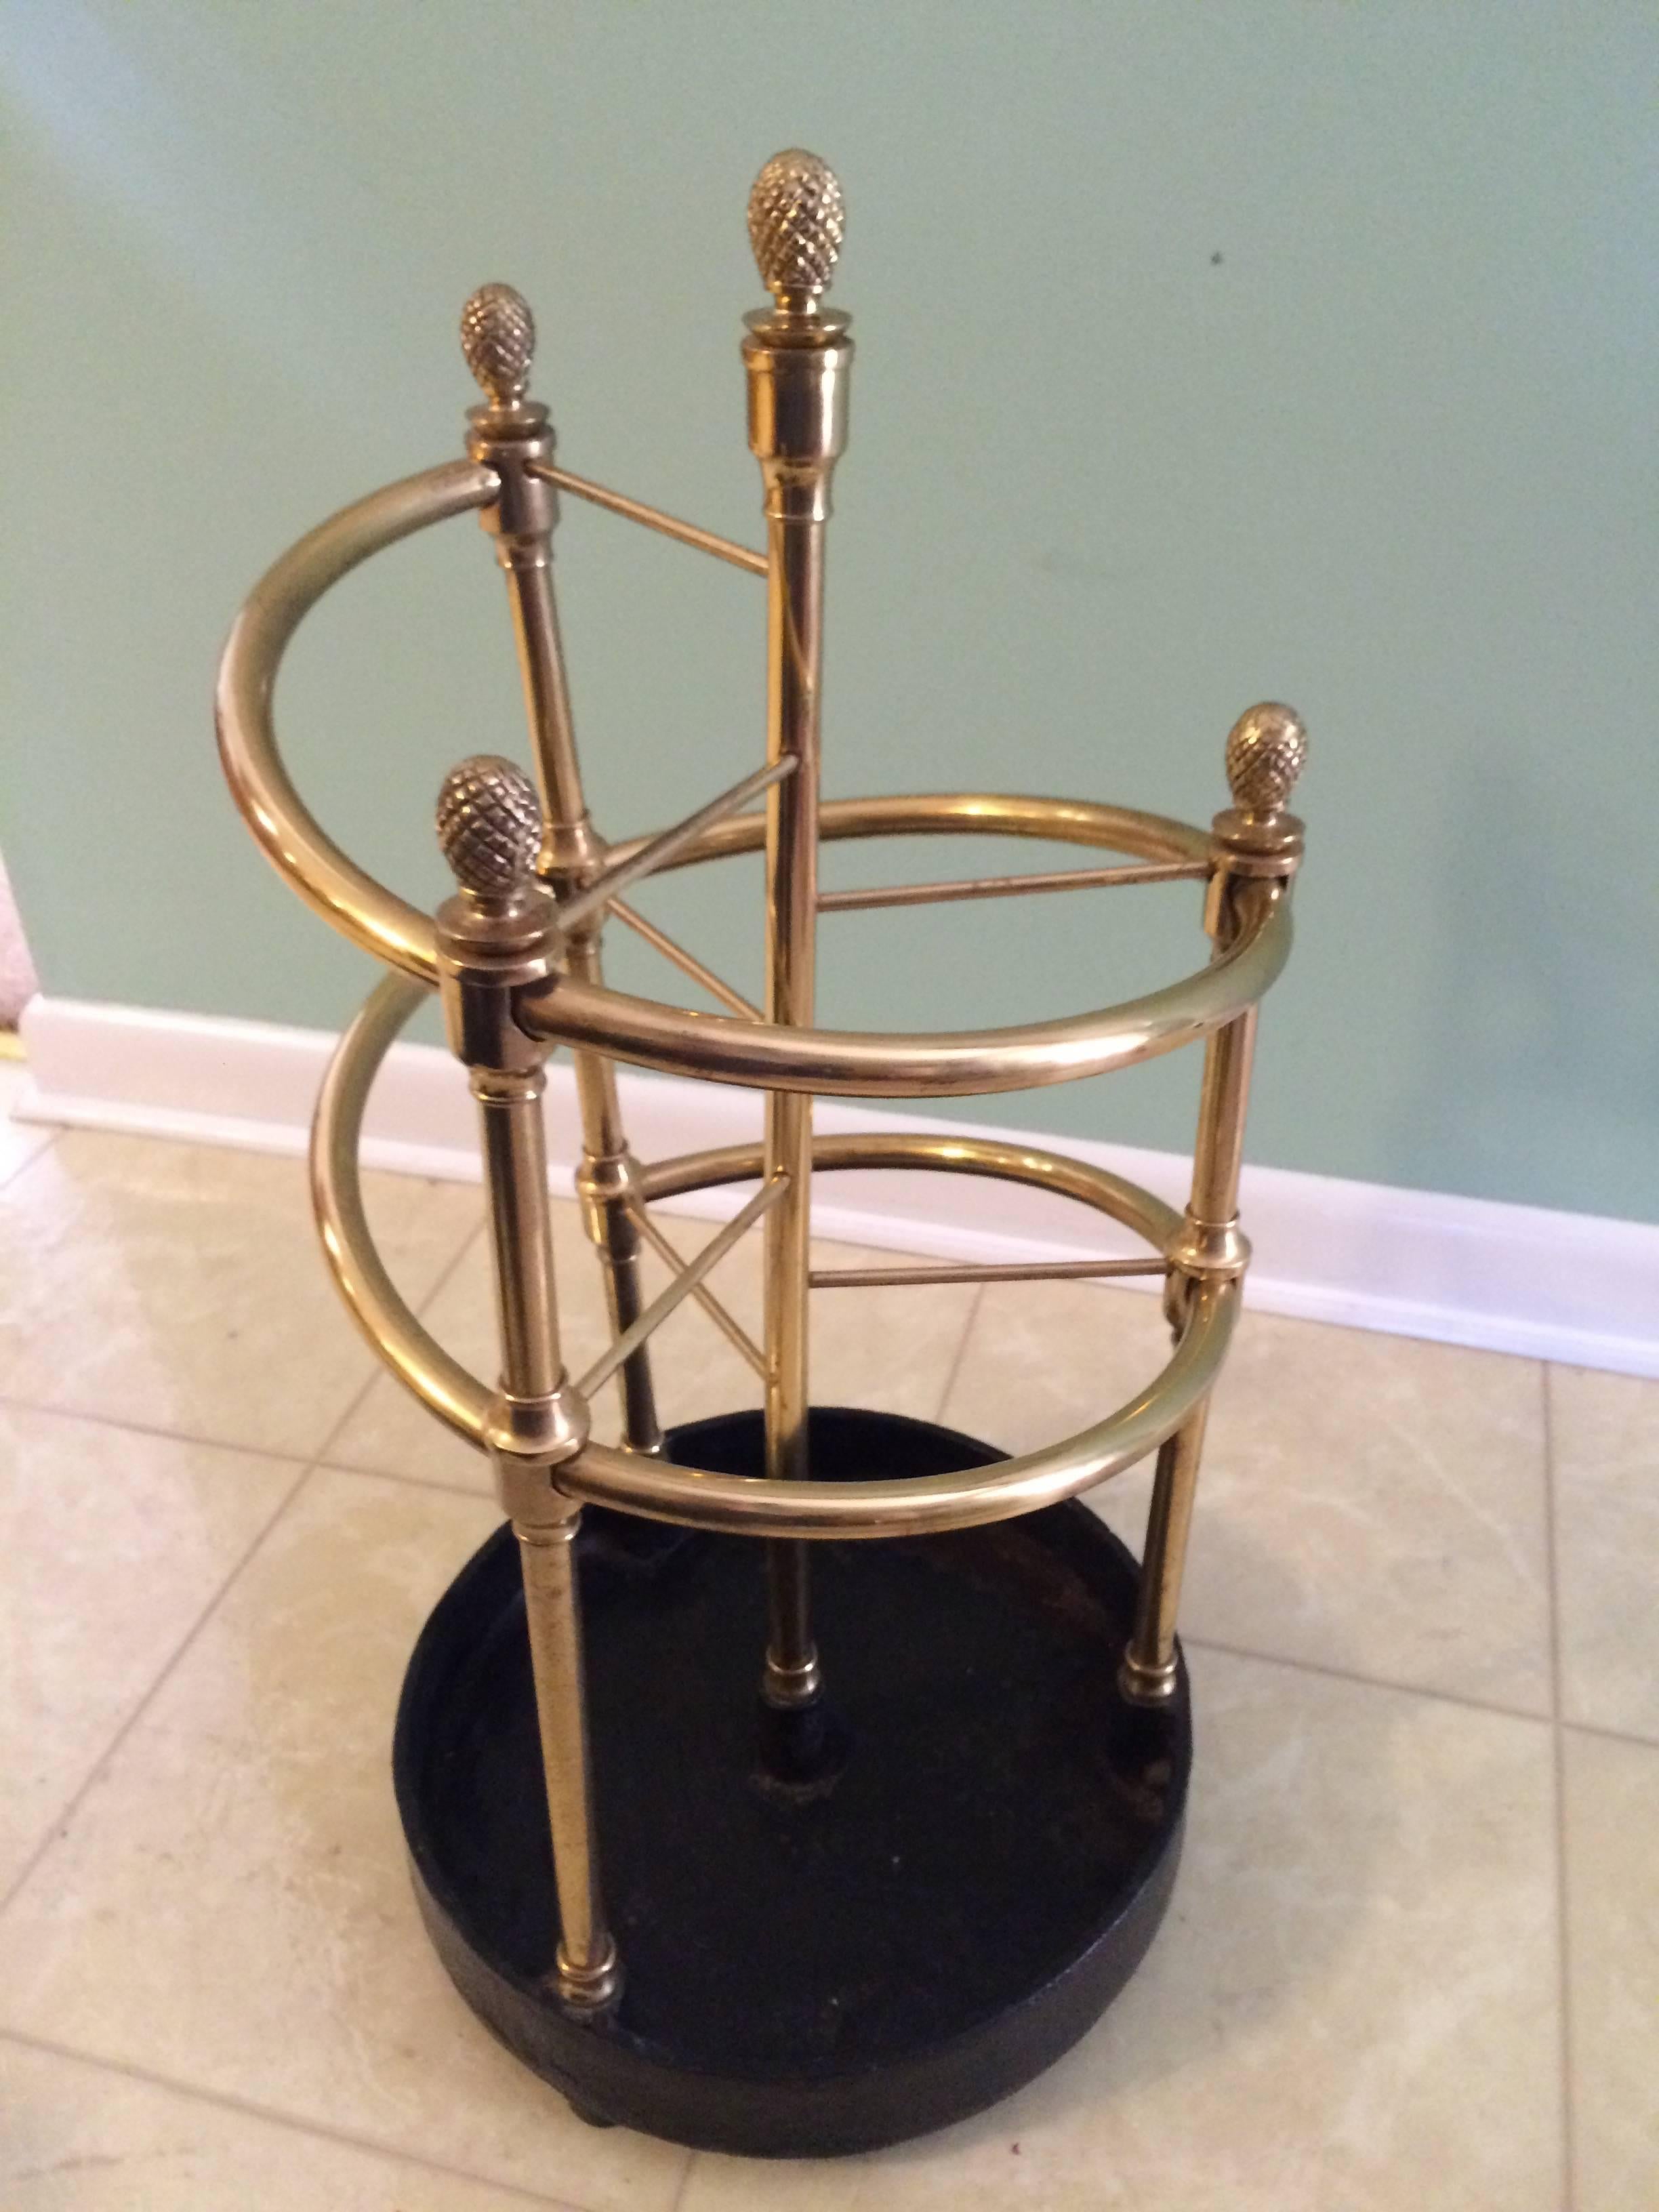 Very large brass umbrella stand spirals into three separate compartments. This is for the home with lots of umbrellas. This rare piece would also be great in a commercial space or restaurant.